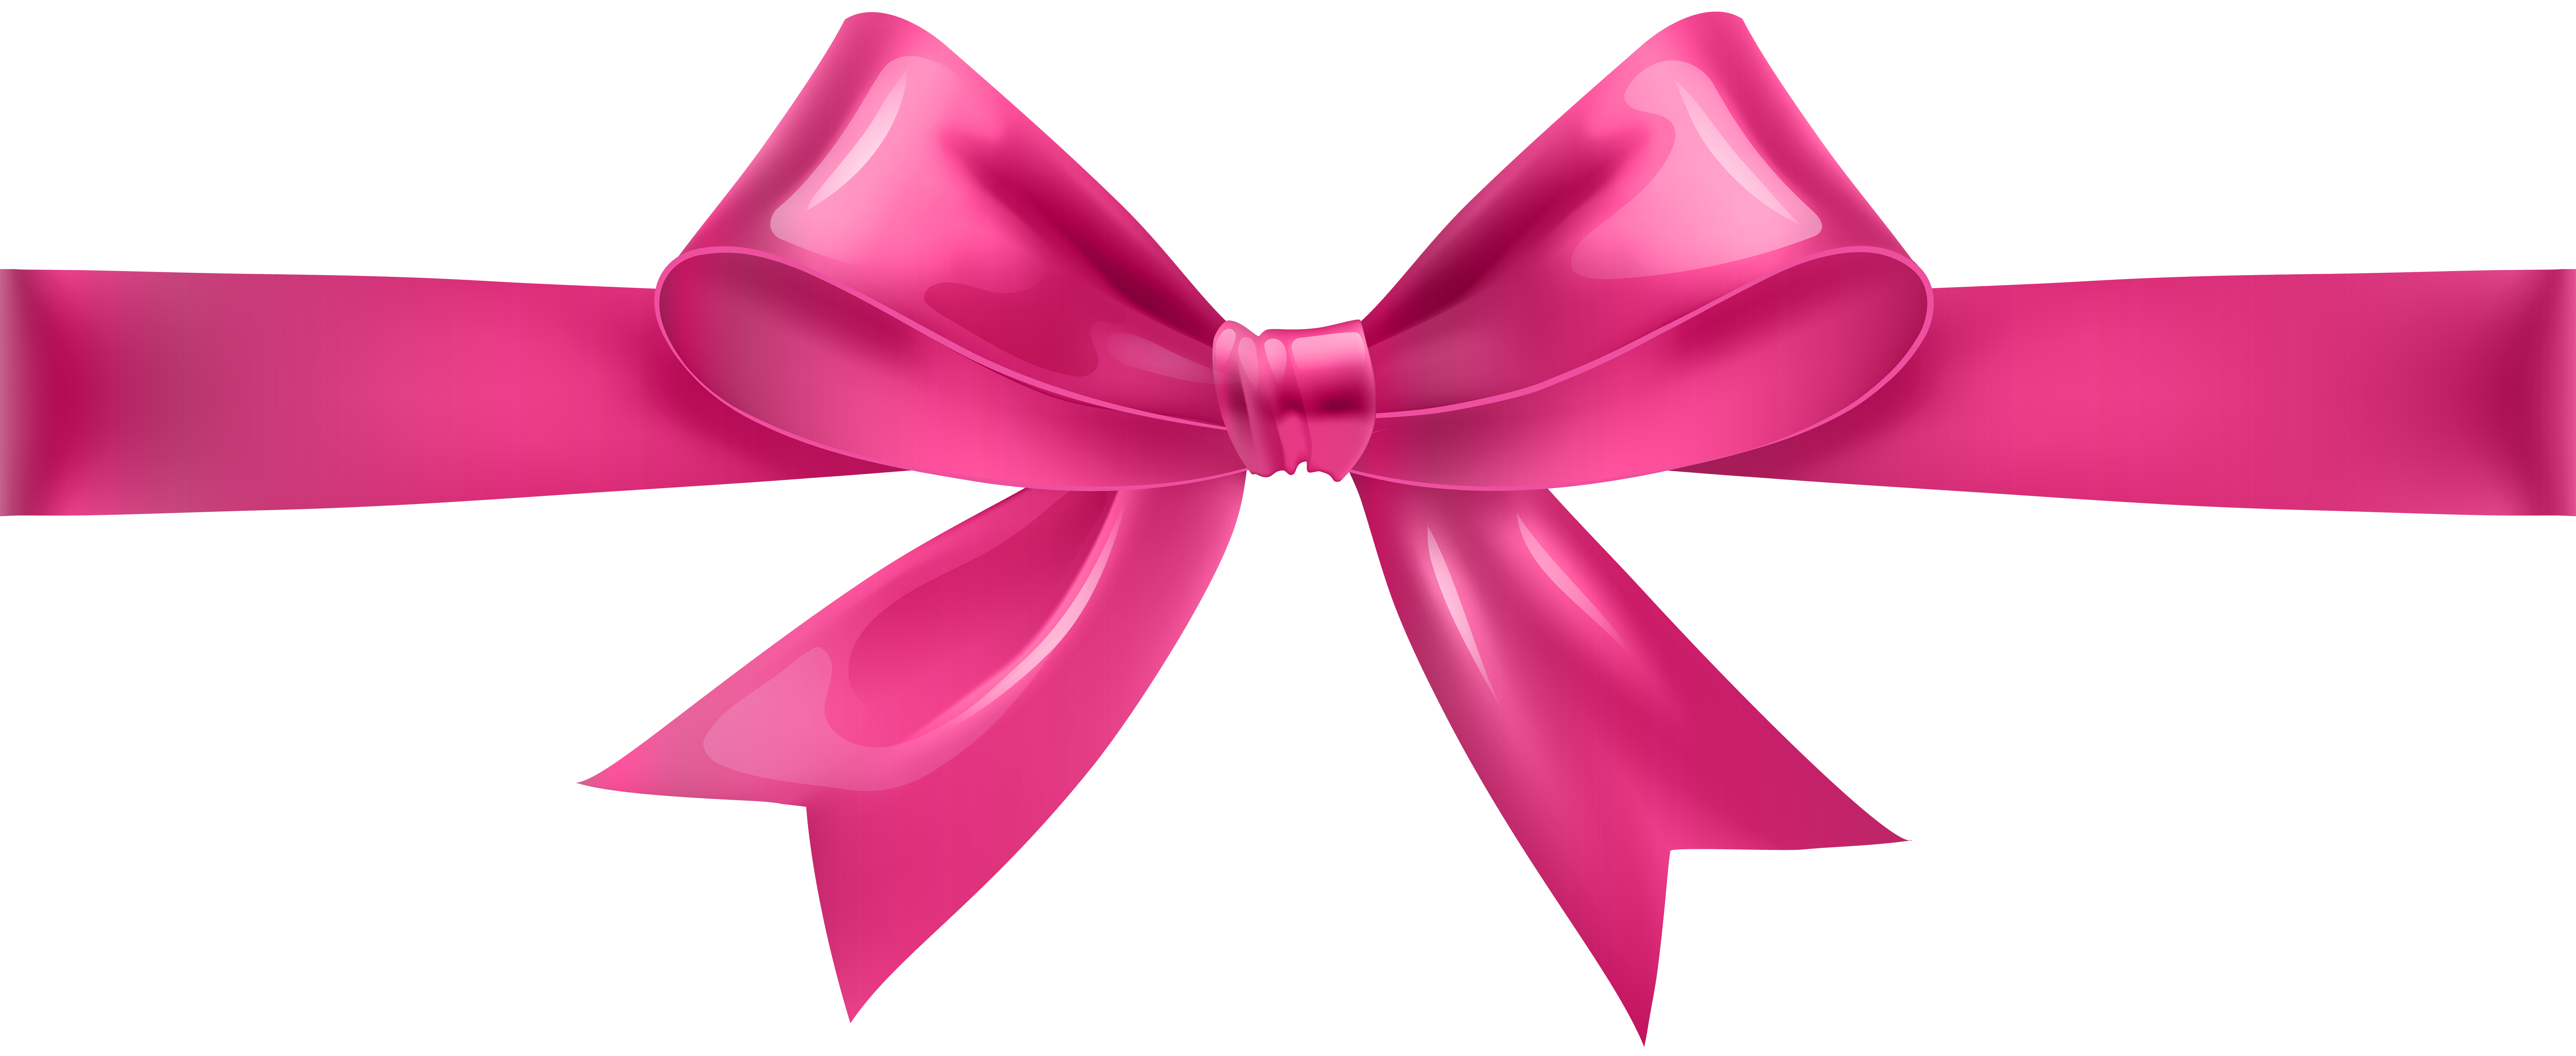 Pink Satin Bow Png / Over 96 pink bow png images are found on vippng ...